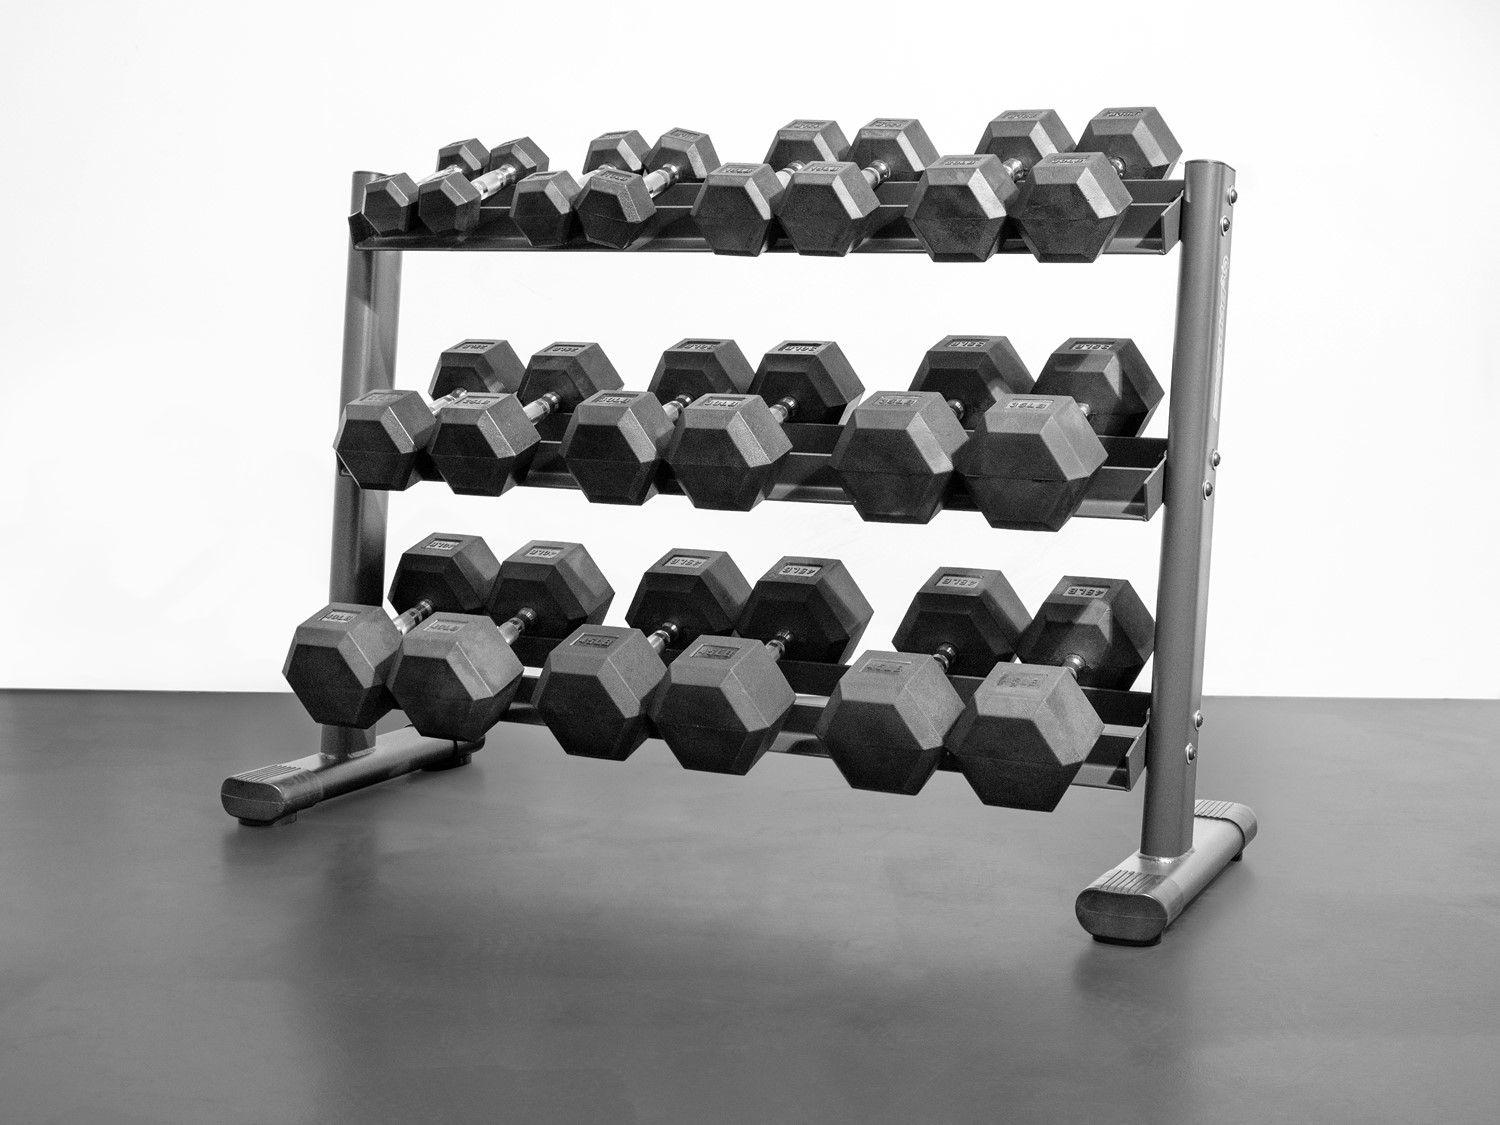 Hexagon-shaped, no-roll heads for easy storage and stability when performing floor workouts